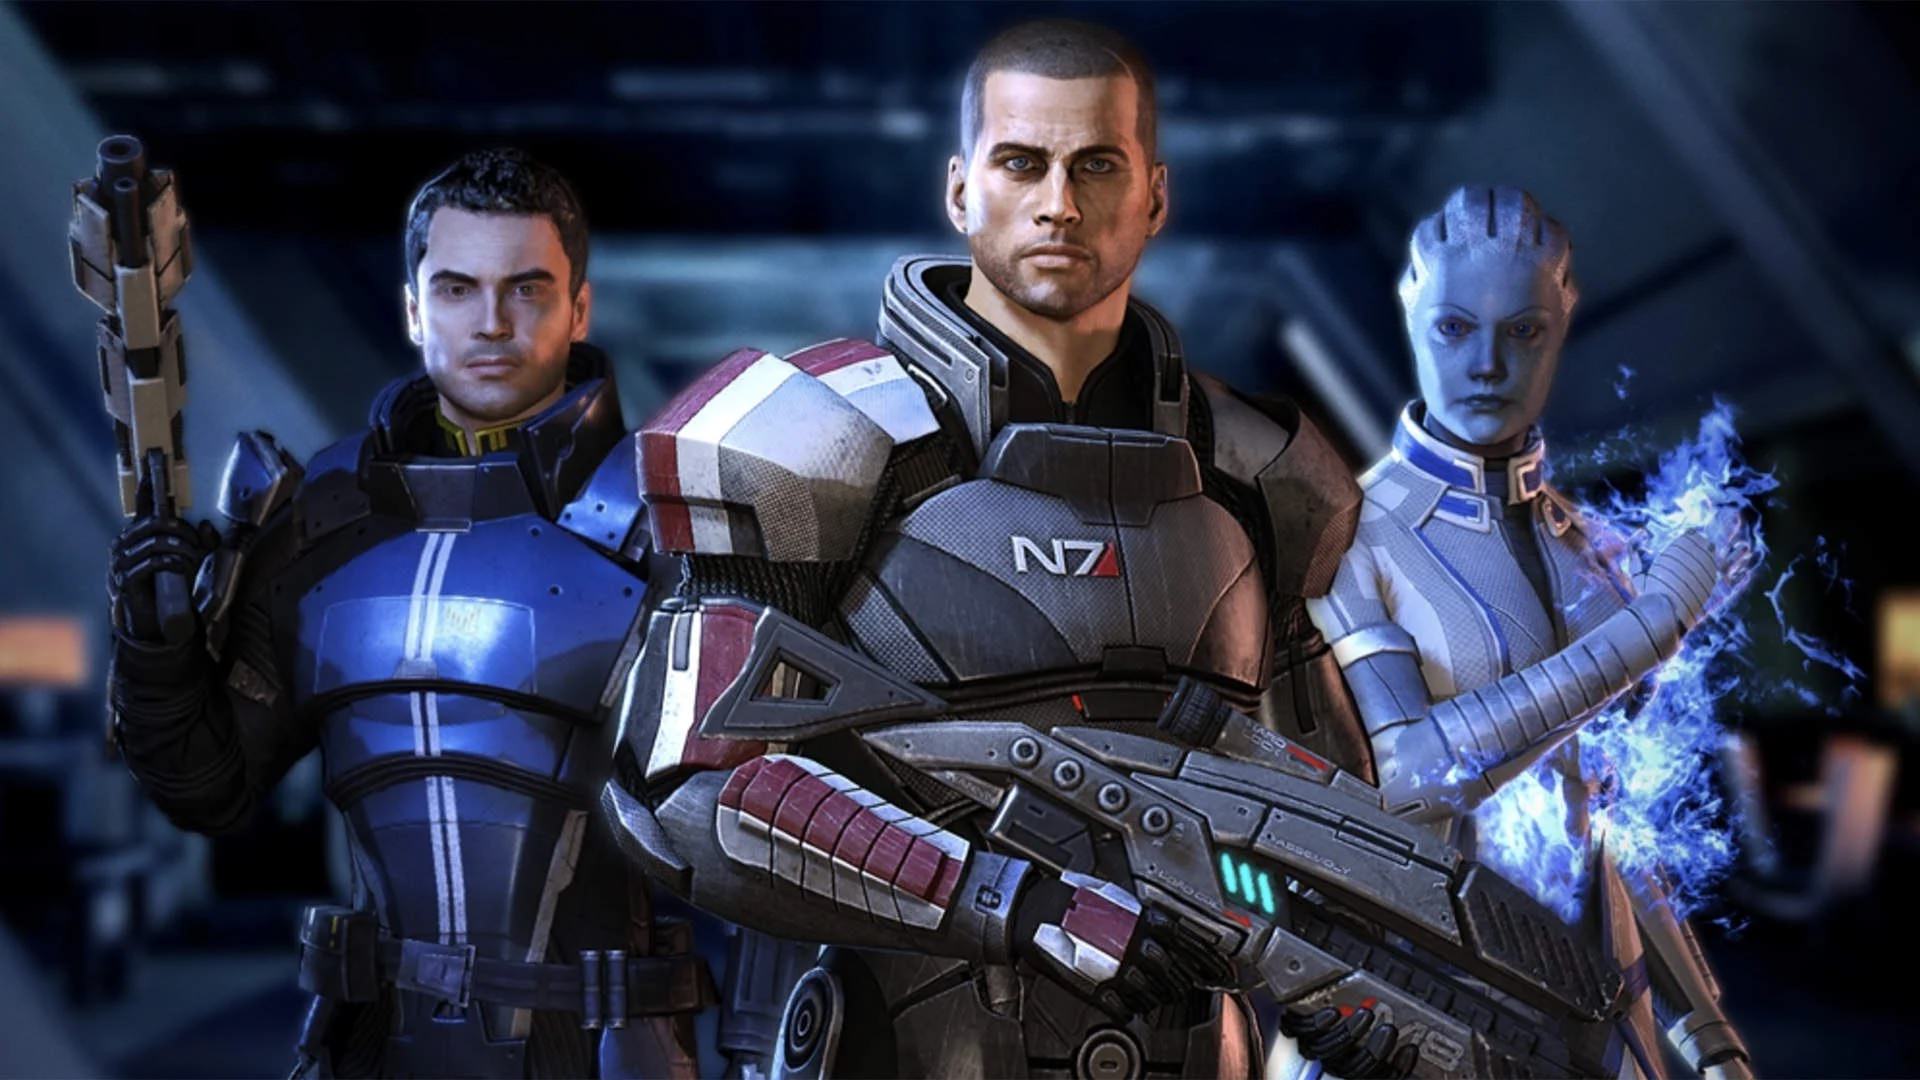 The characters of Mass Effect series in Mass Effect Legendary Edition